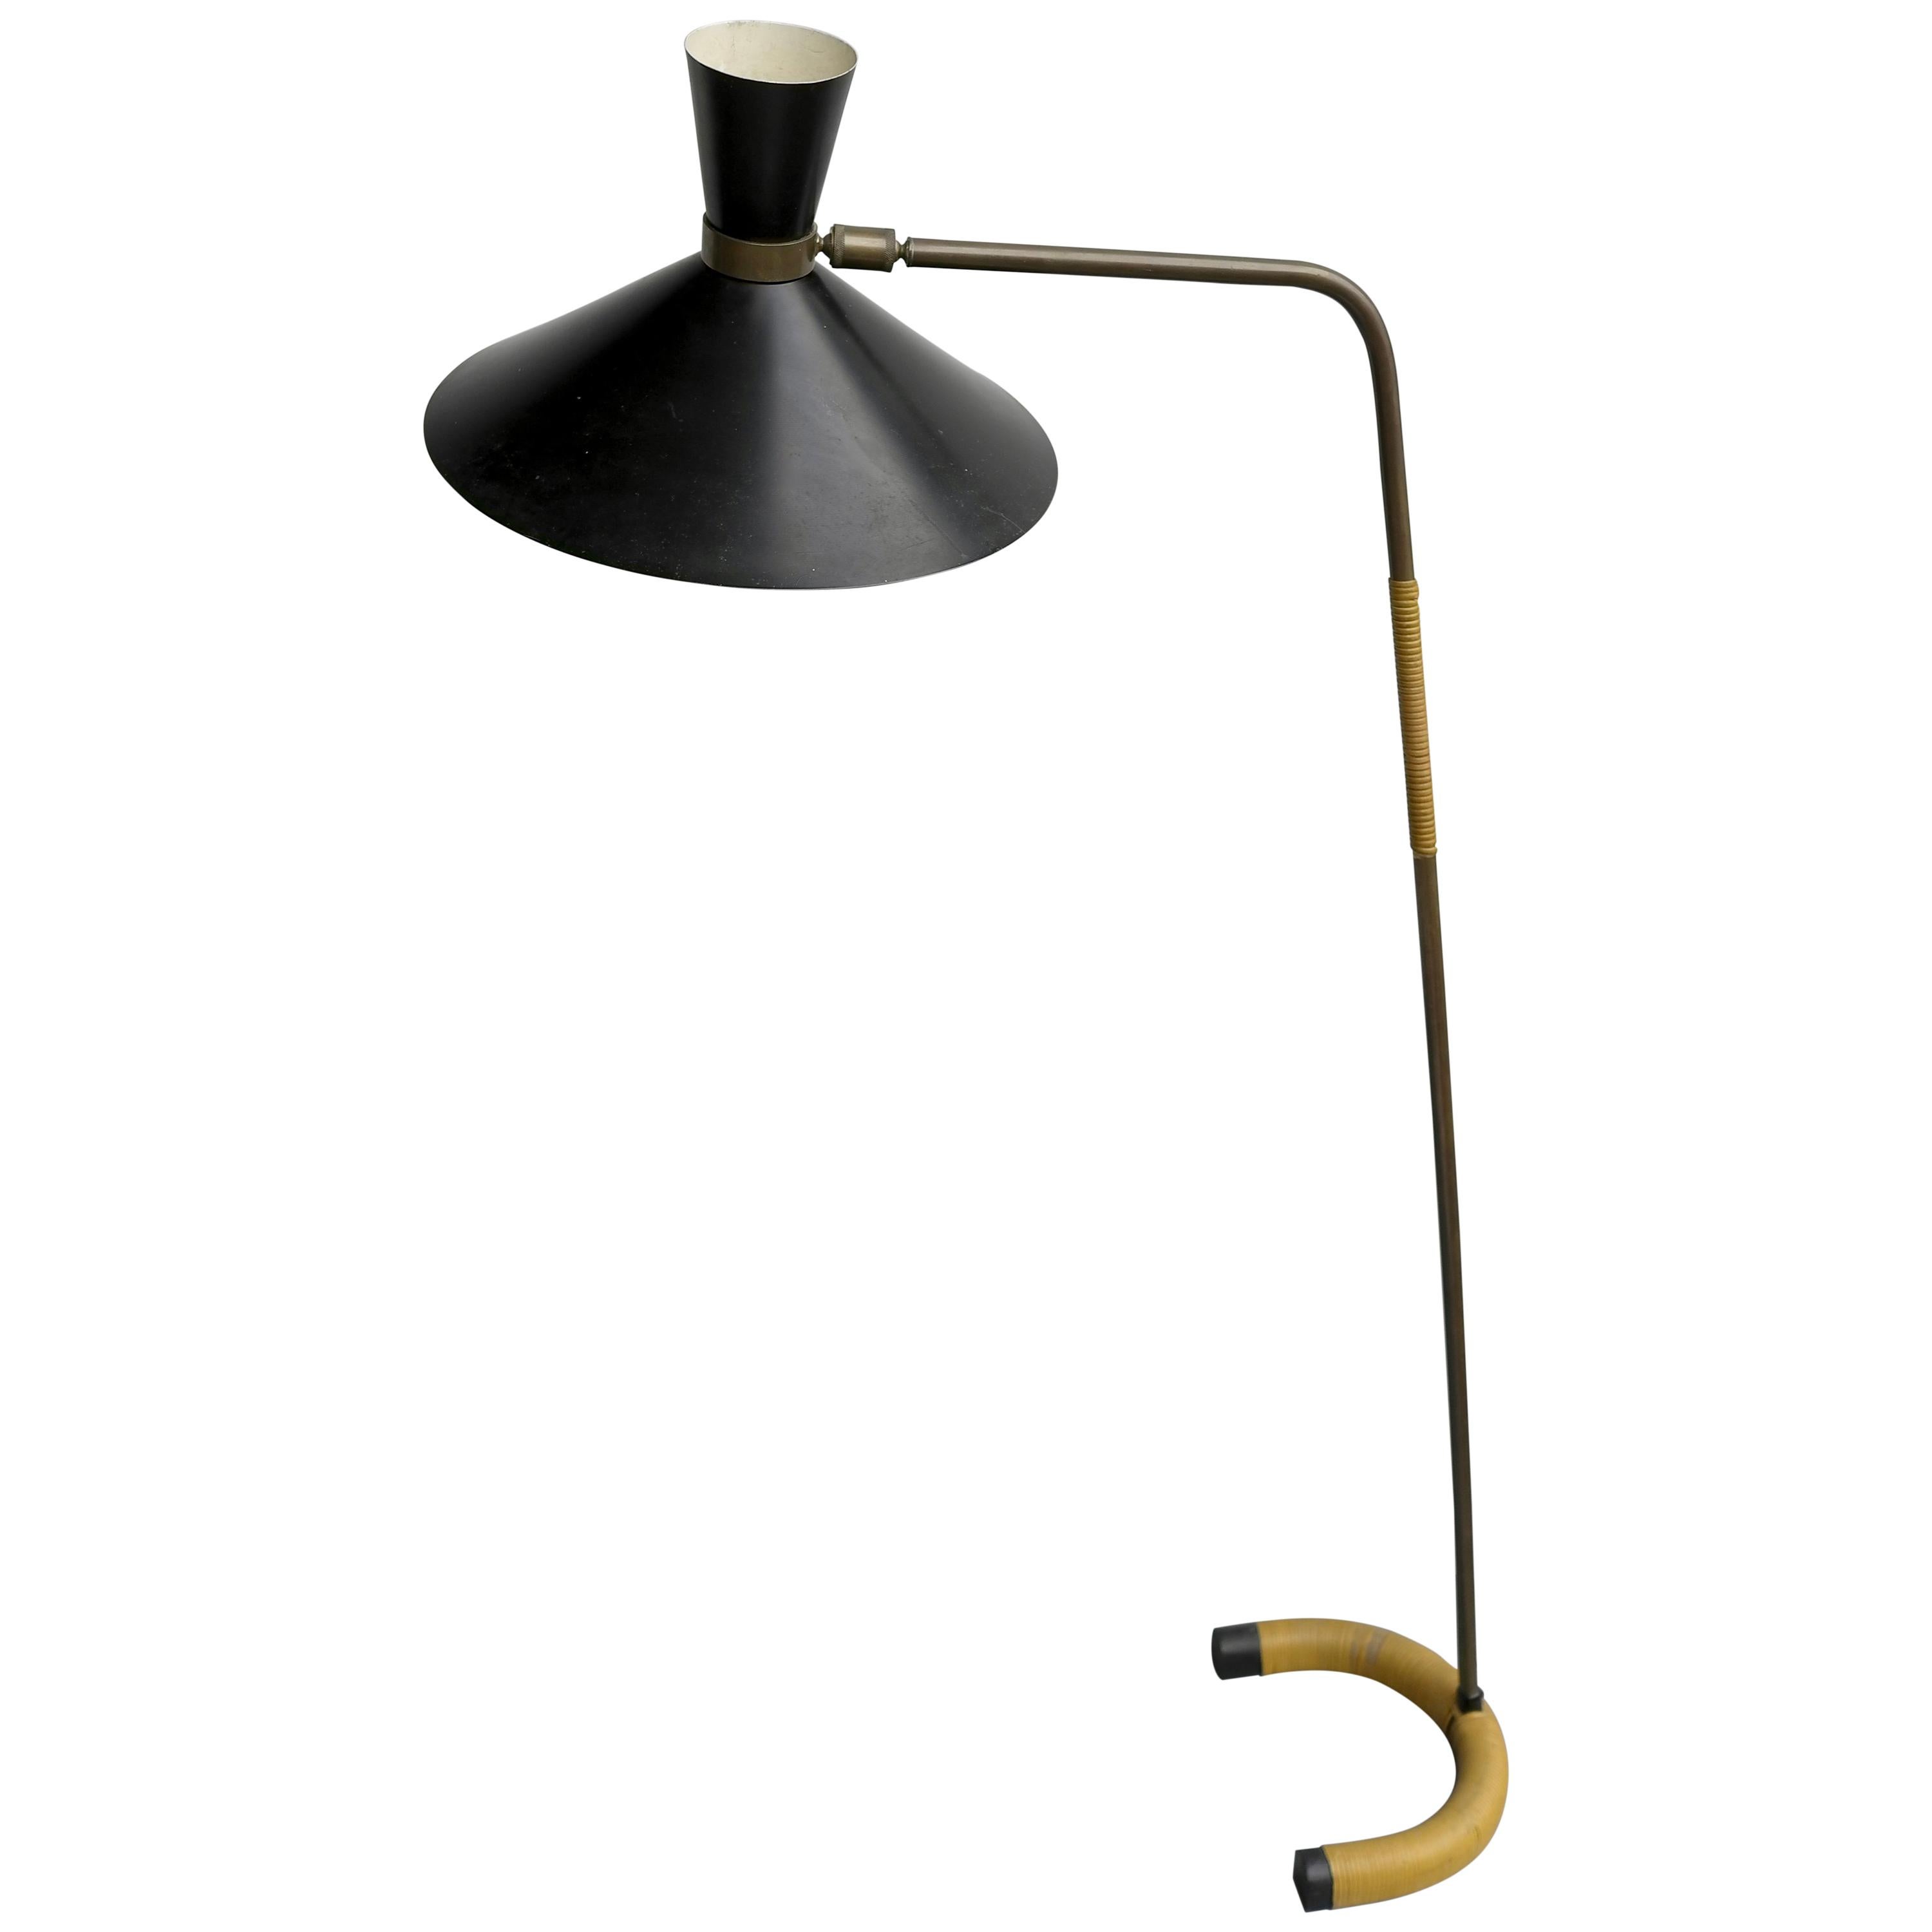 Rare Floor Lamp by Jacques Biny in Brass and Black Hood Edition Luminalite, 1953 For Sale